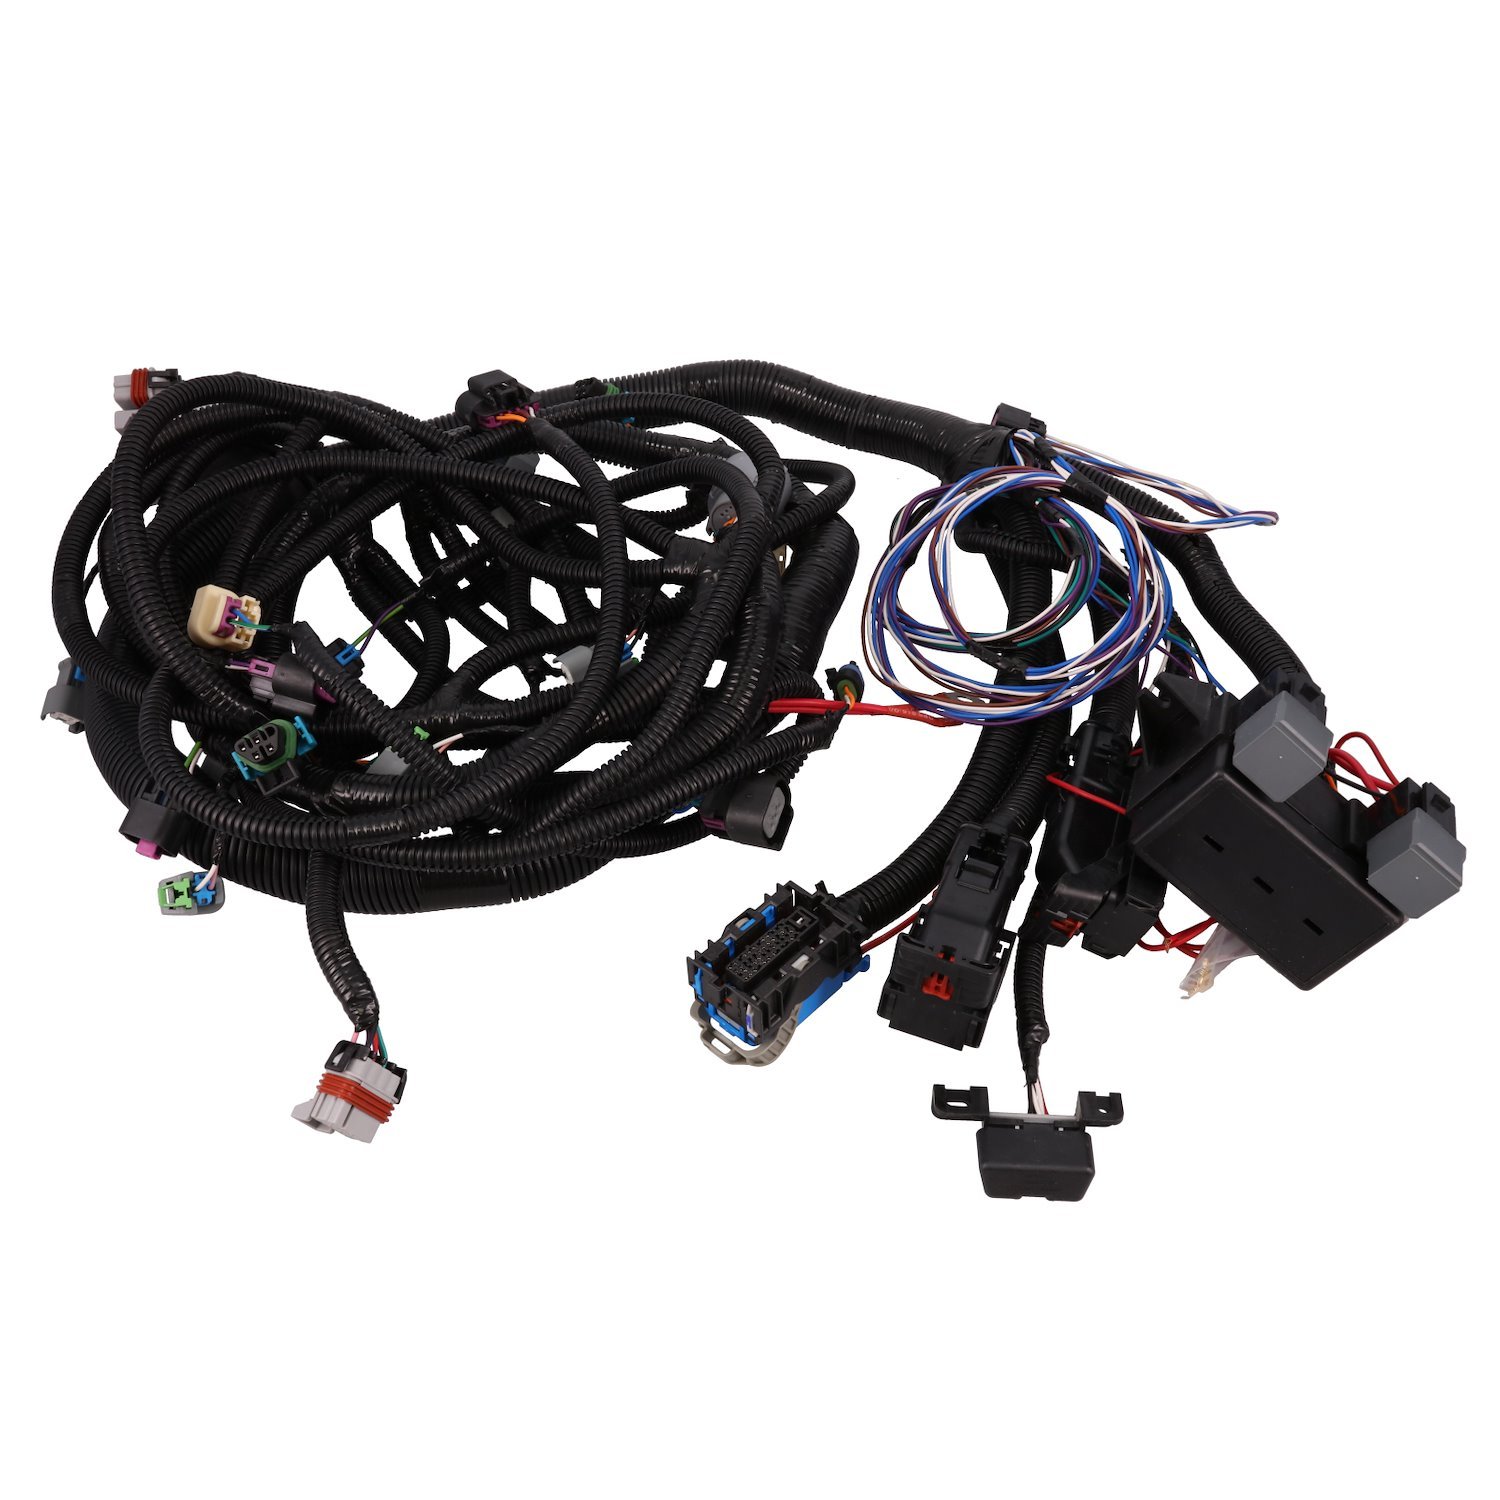 WH1214-1 Standalone Wiring Harness, LY6, L92 Drive by Wire w/ 4L60E 11-pin auto trans